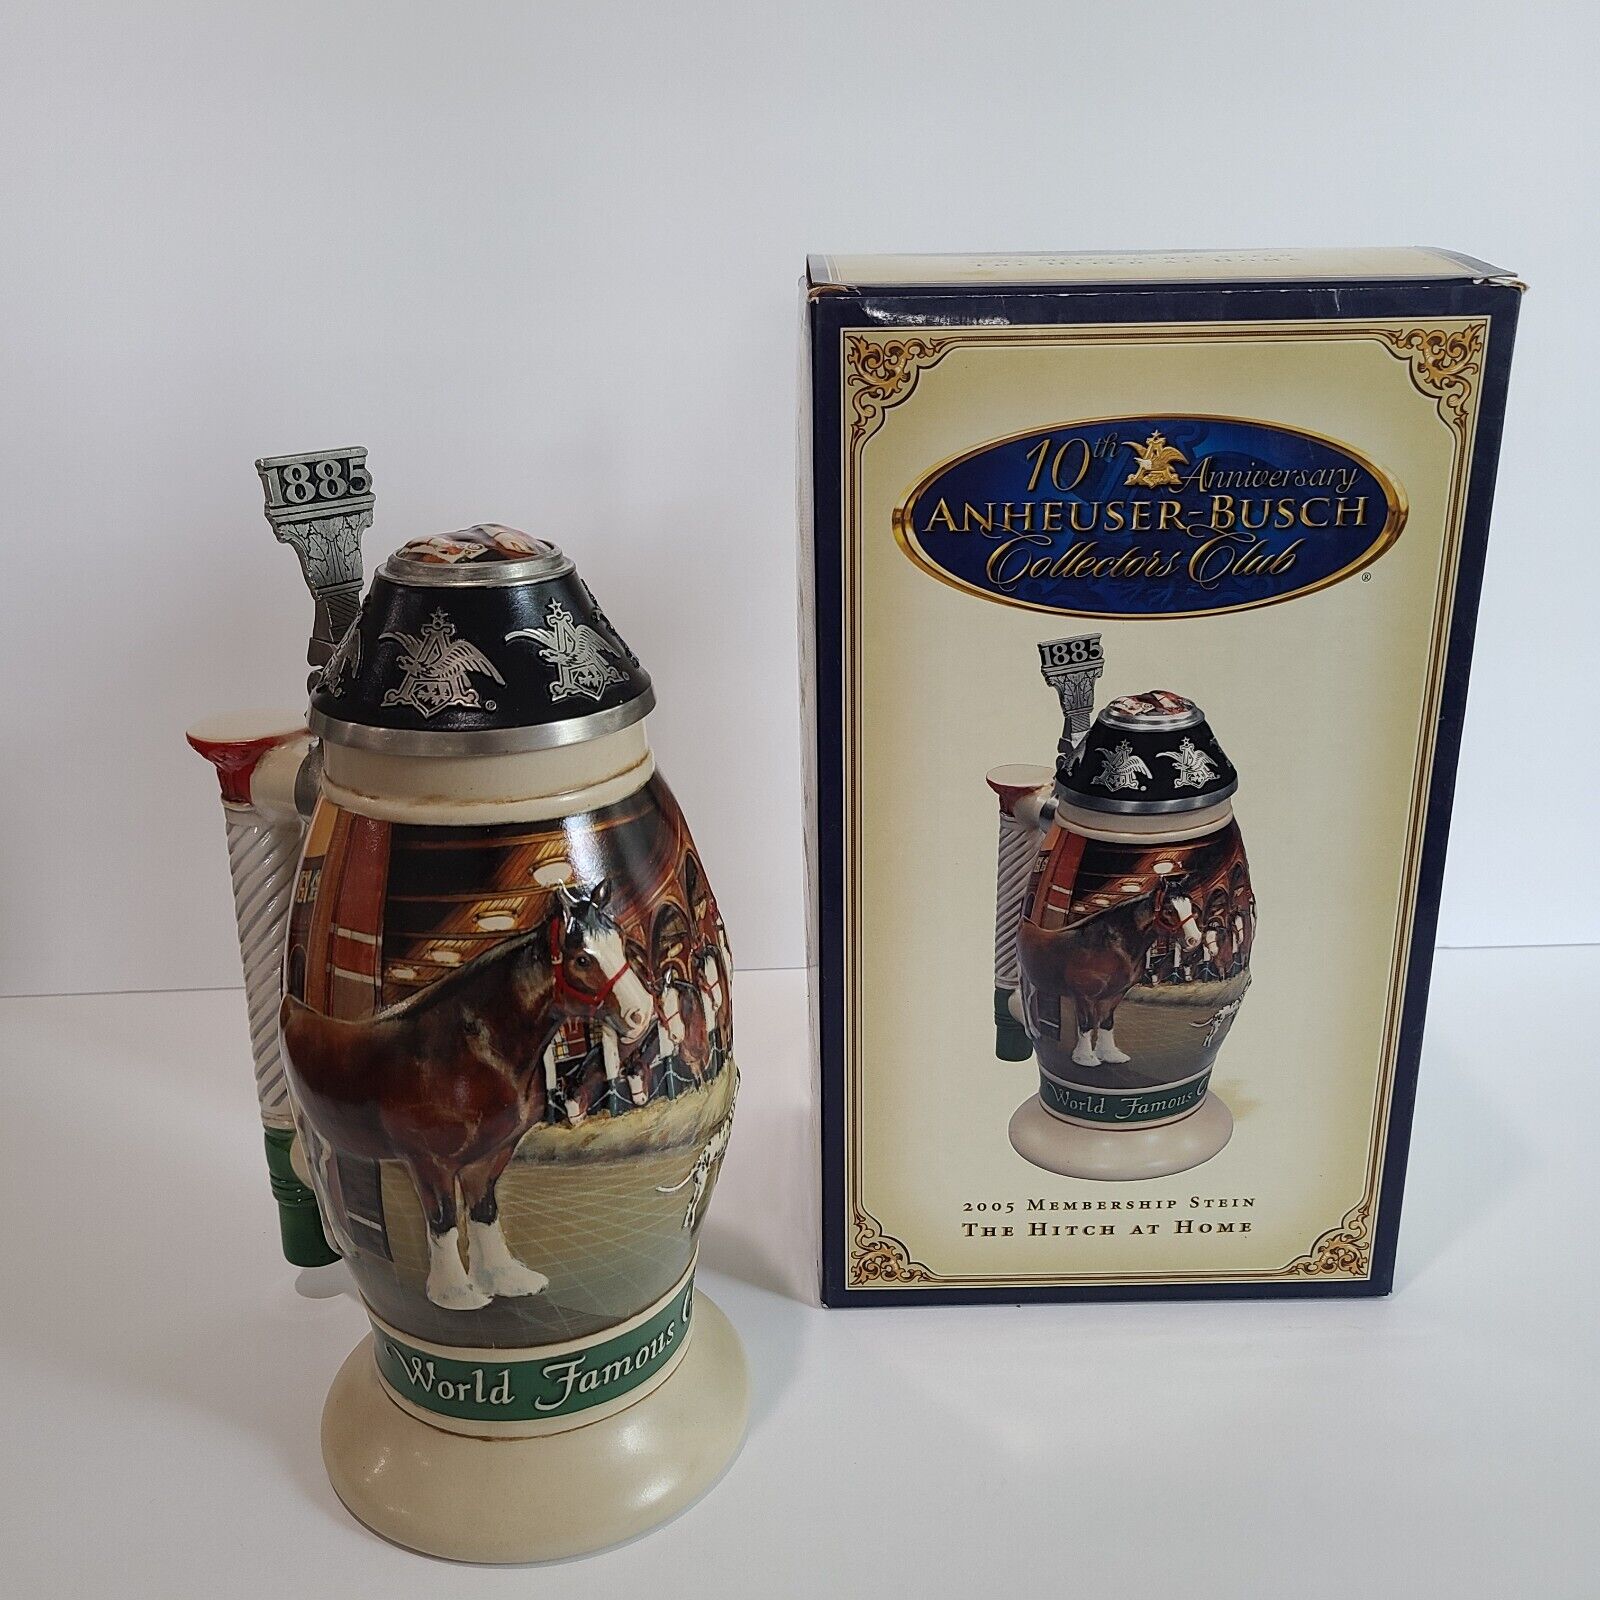 2005 Anheuser Busch 10th Anniversary Membership Stein The Hitch at Home New in B